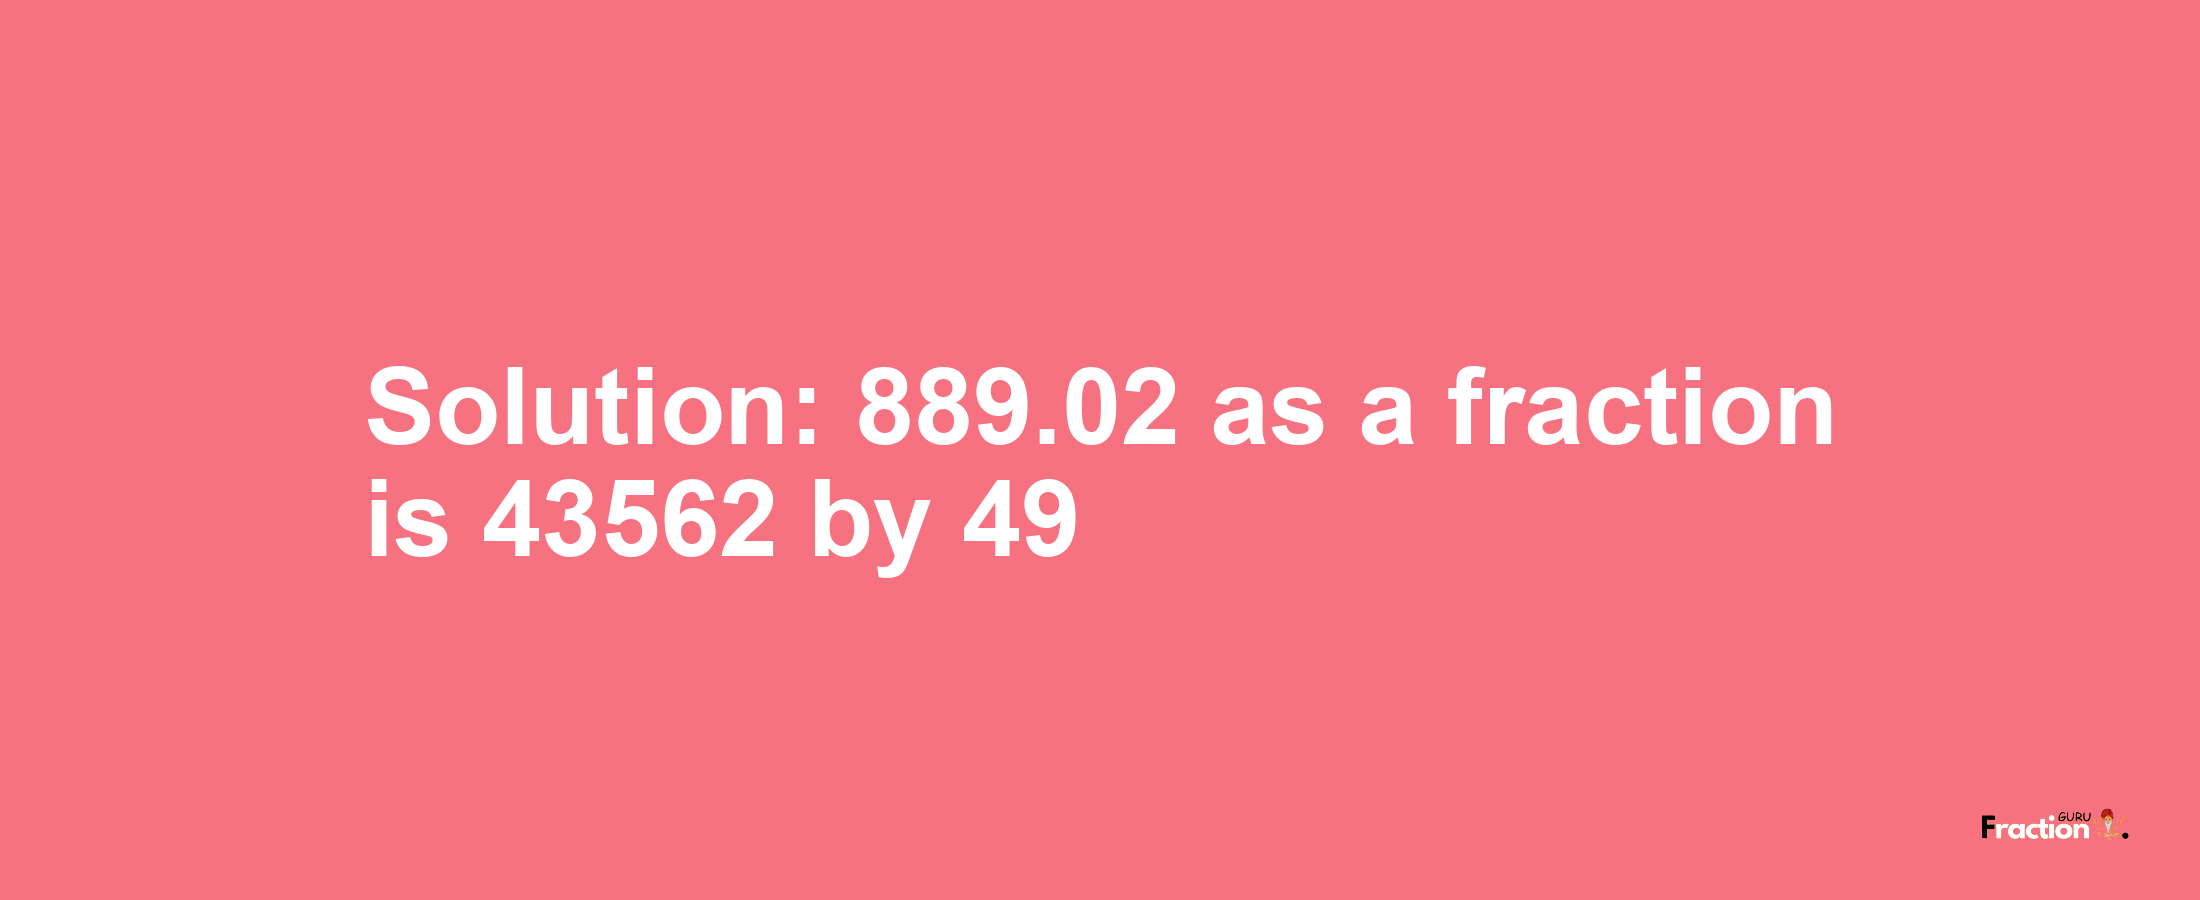 Solution:889.02 as a fraction is 43562/49